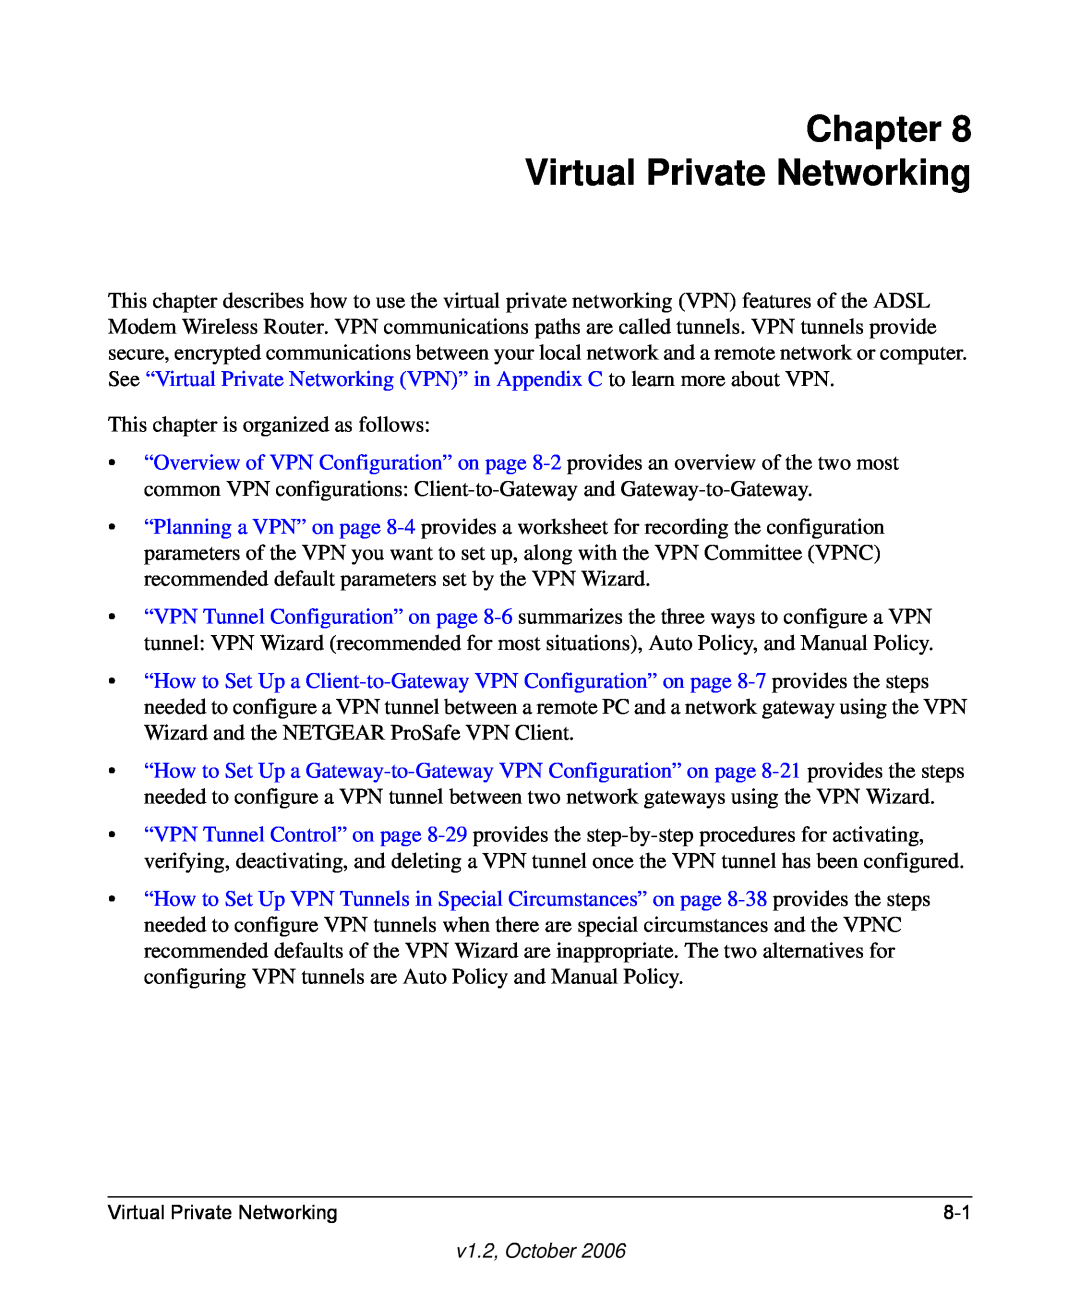 NETGEAR DG834G manual Chapter Virtual Private Networking 